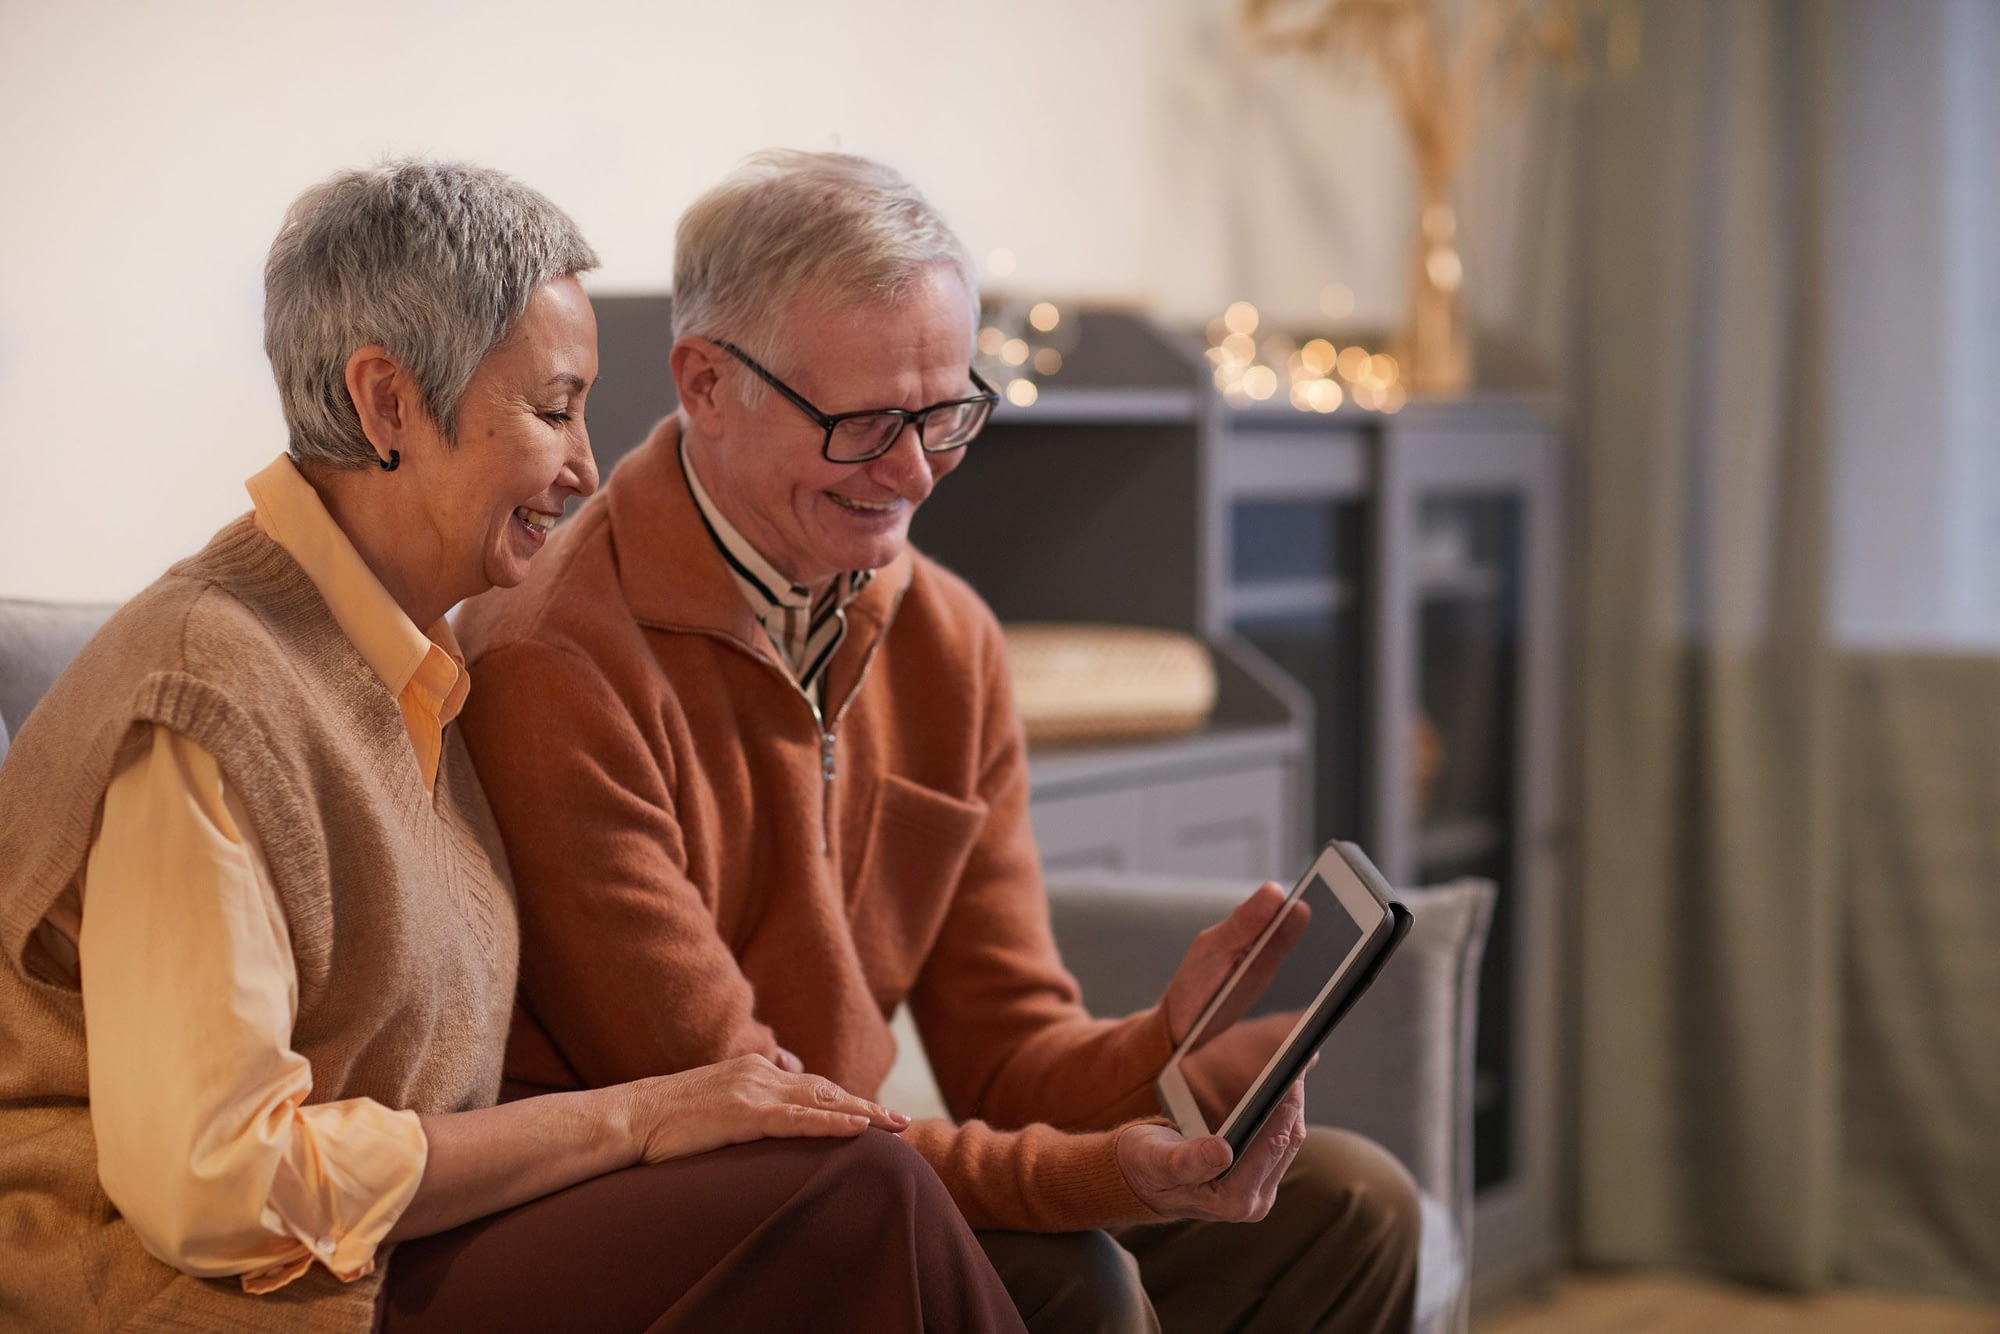 New Tech in Senior Homes: 4 Must-Have Smart Home Technologies